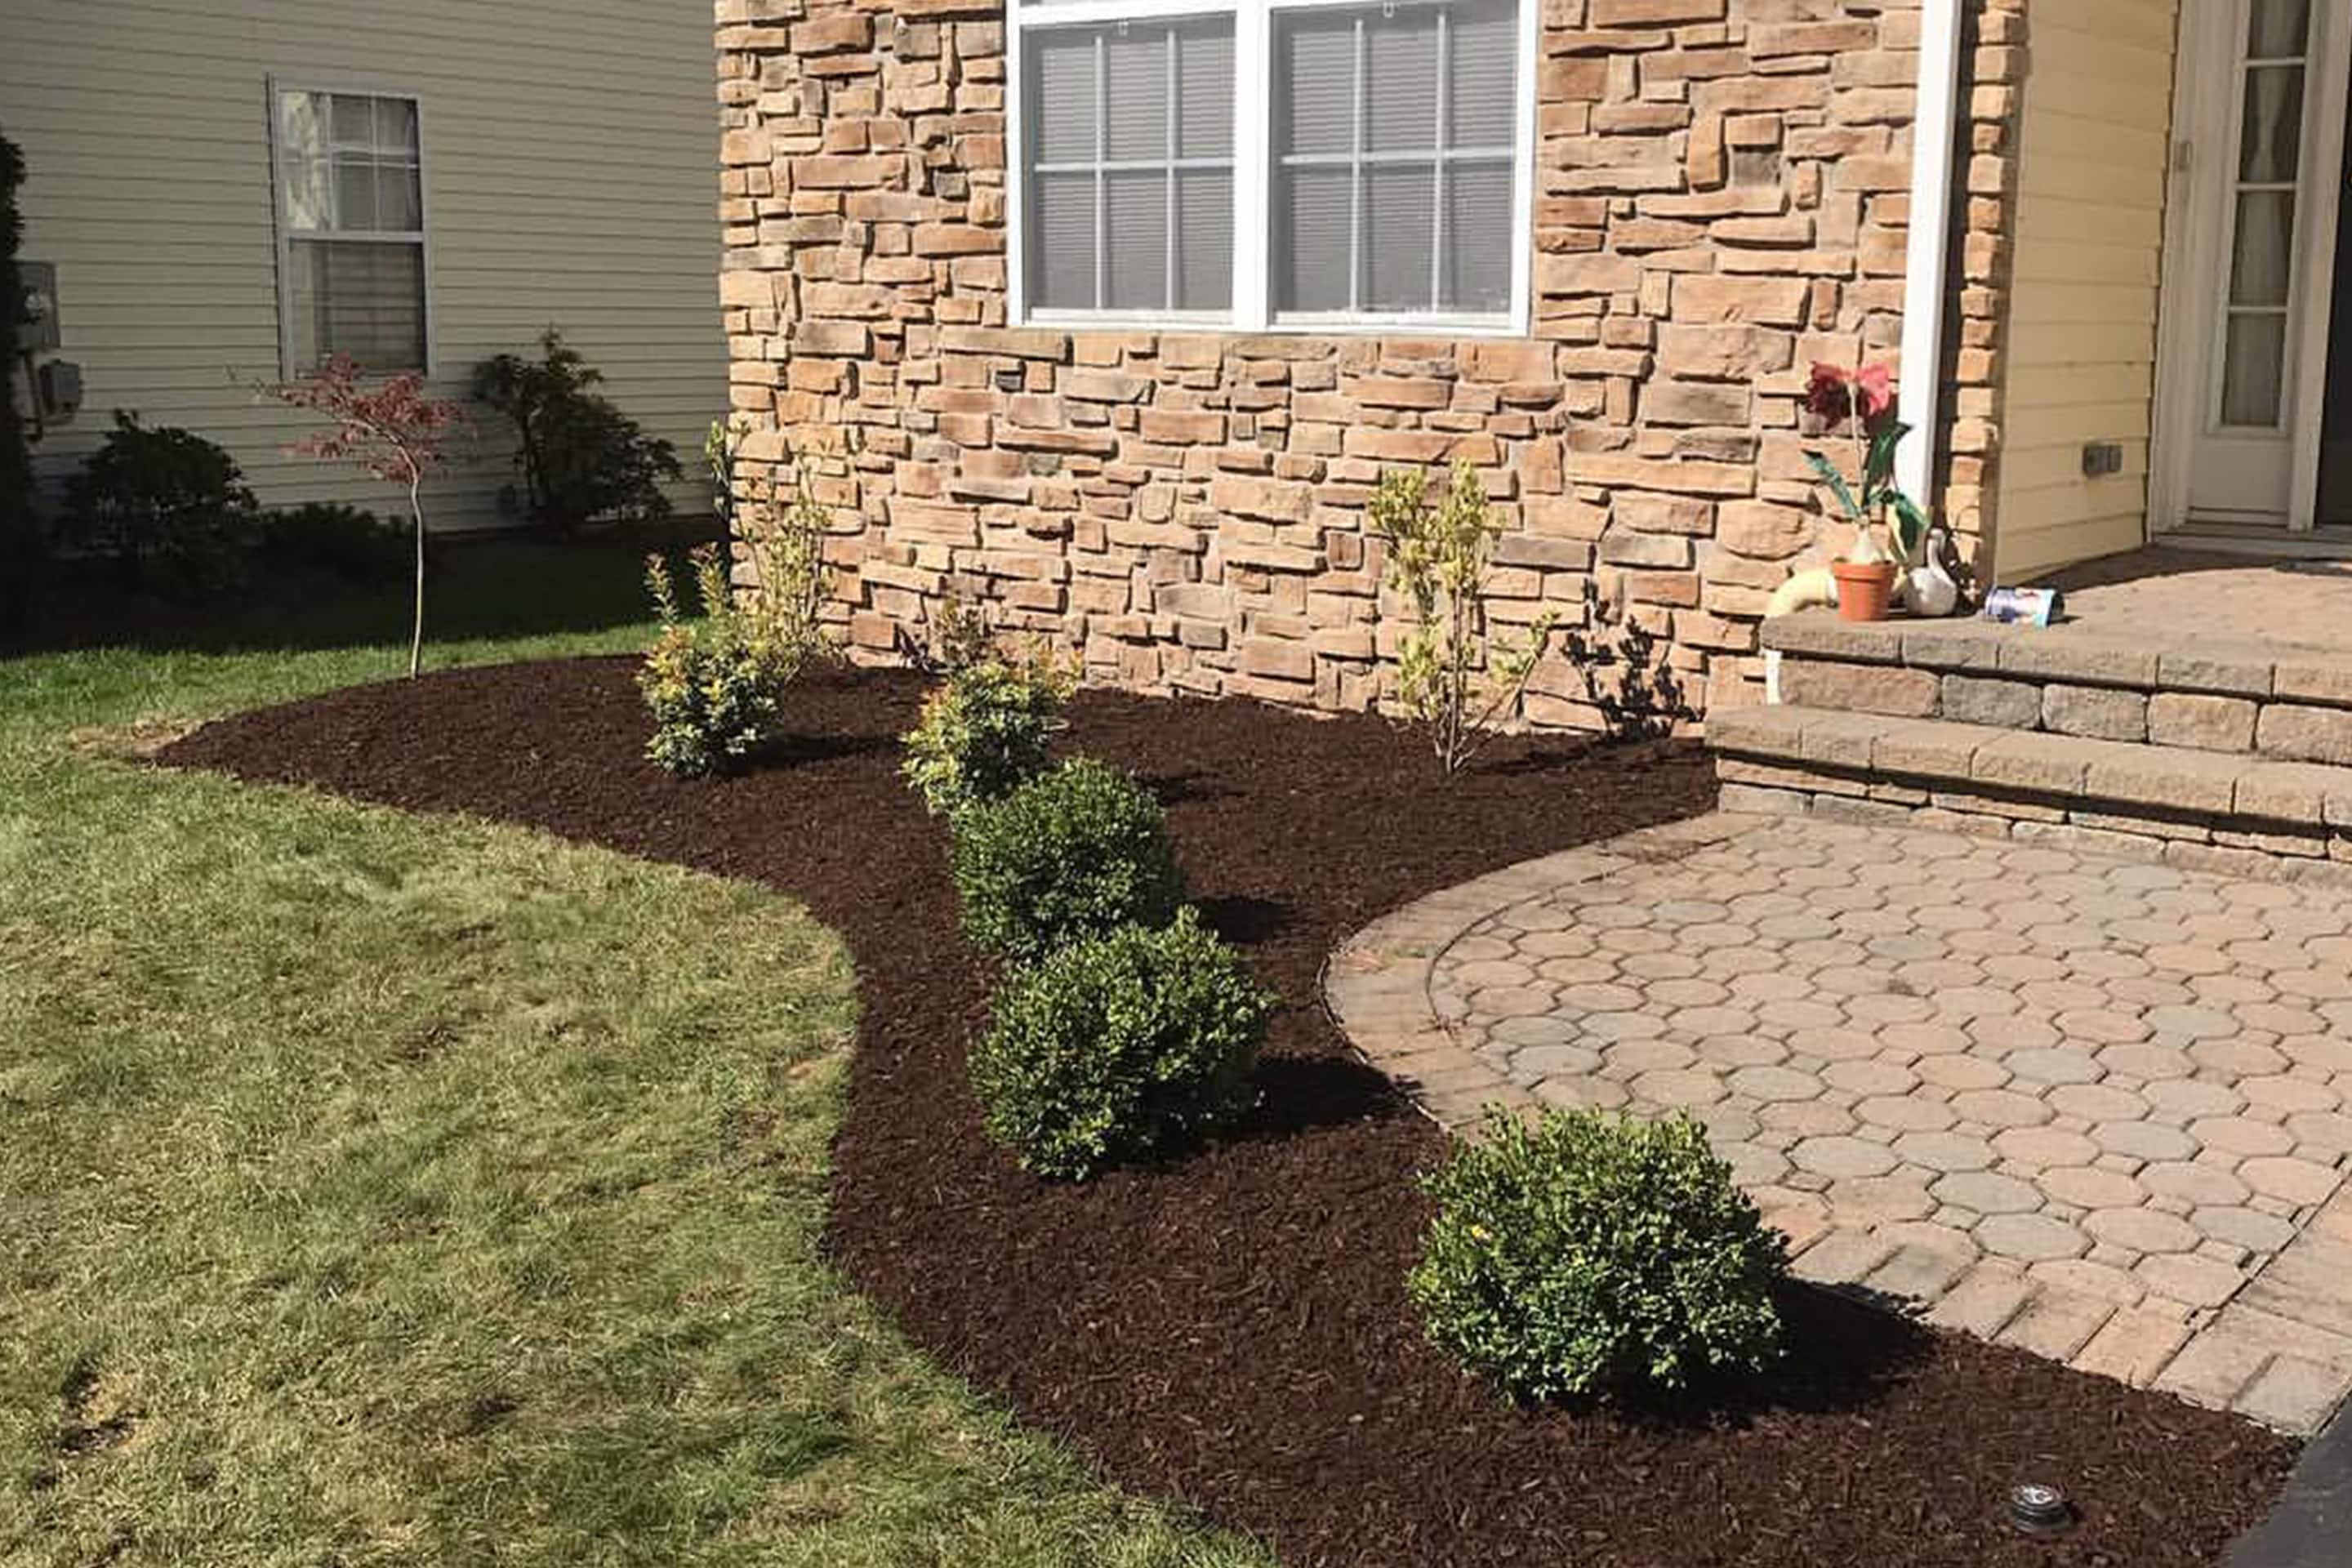 mulch area with new shrubs by paver walkway - Landscape Installations by Vision Landscape Services